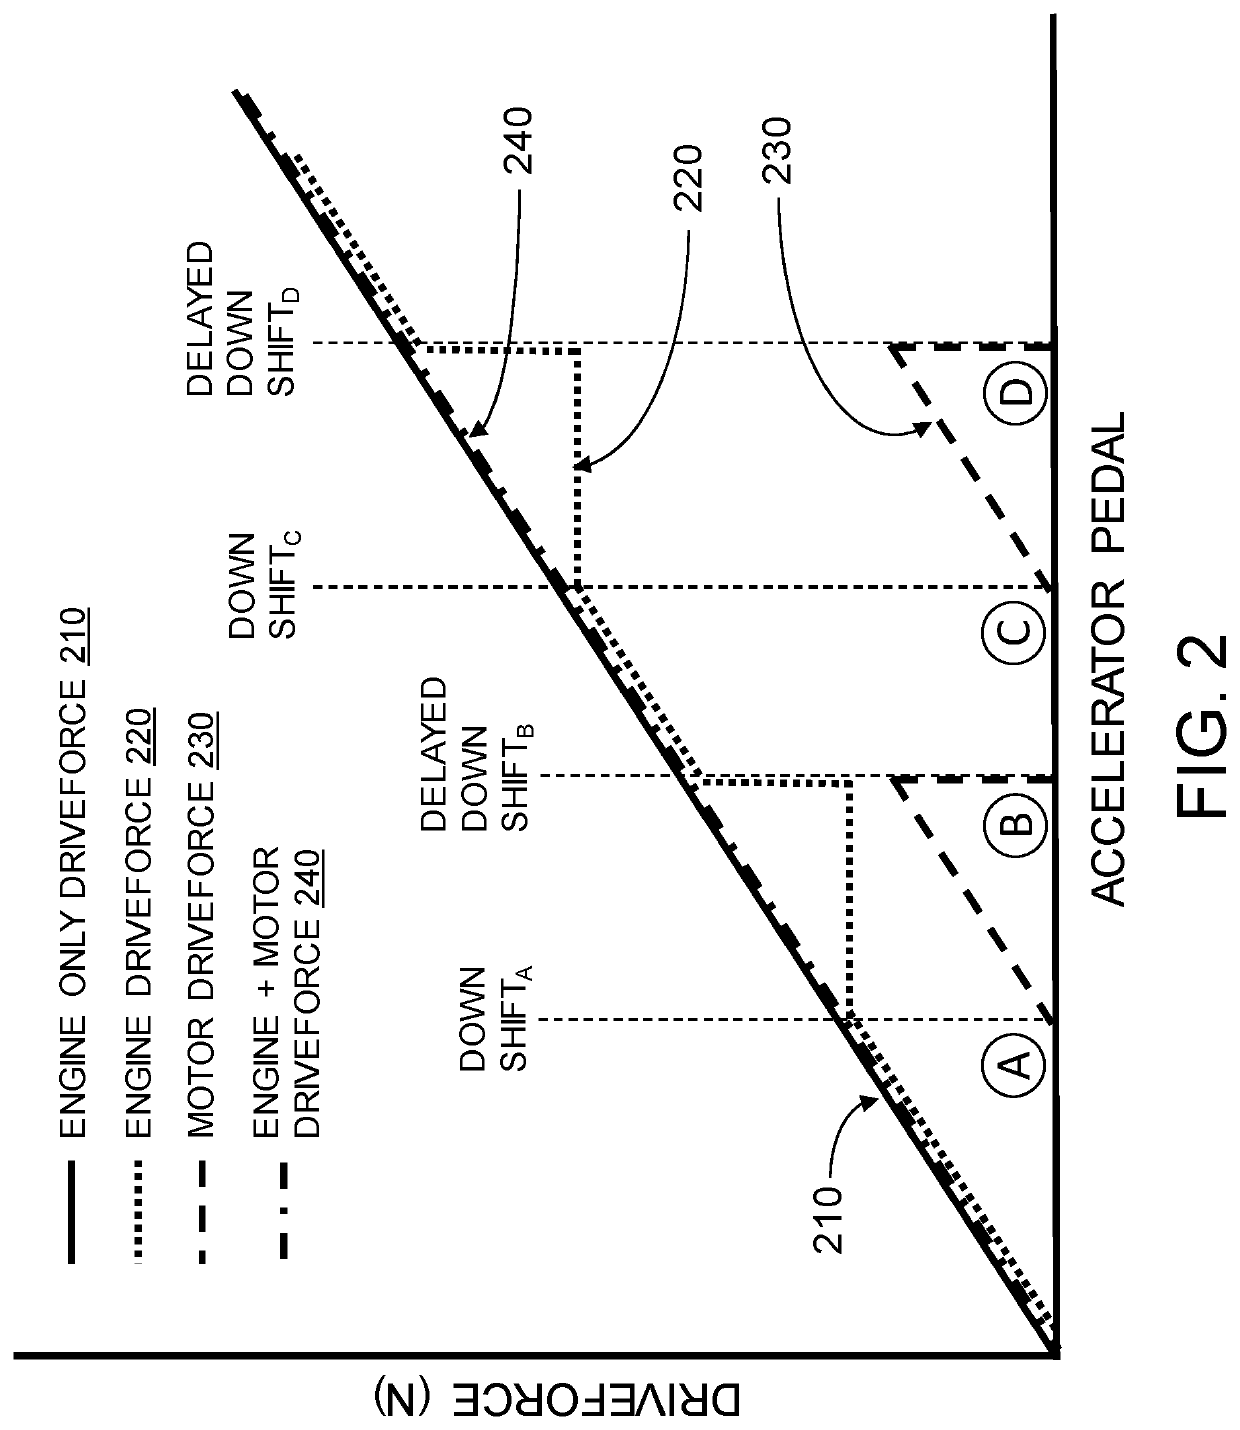 Gradeability control in a hybrid vehicle